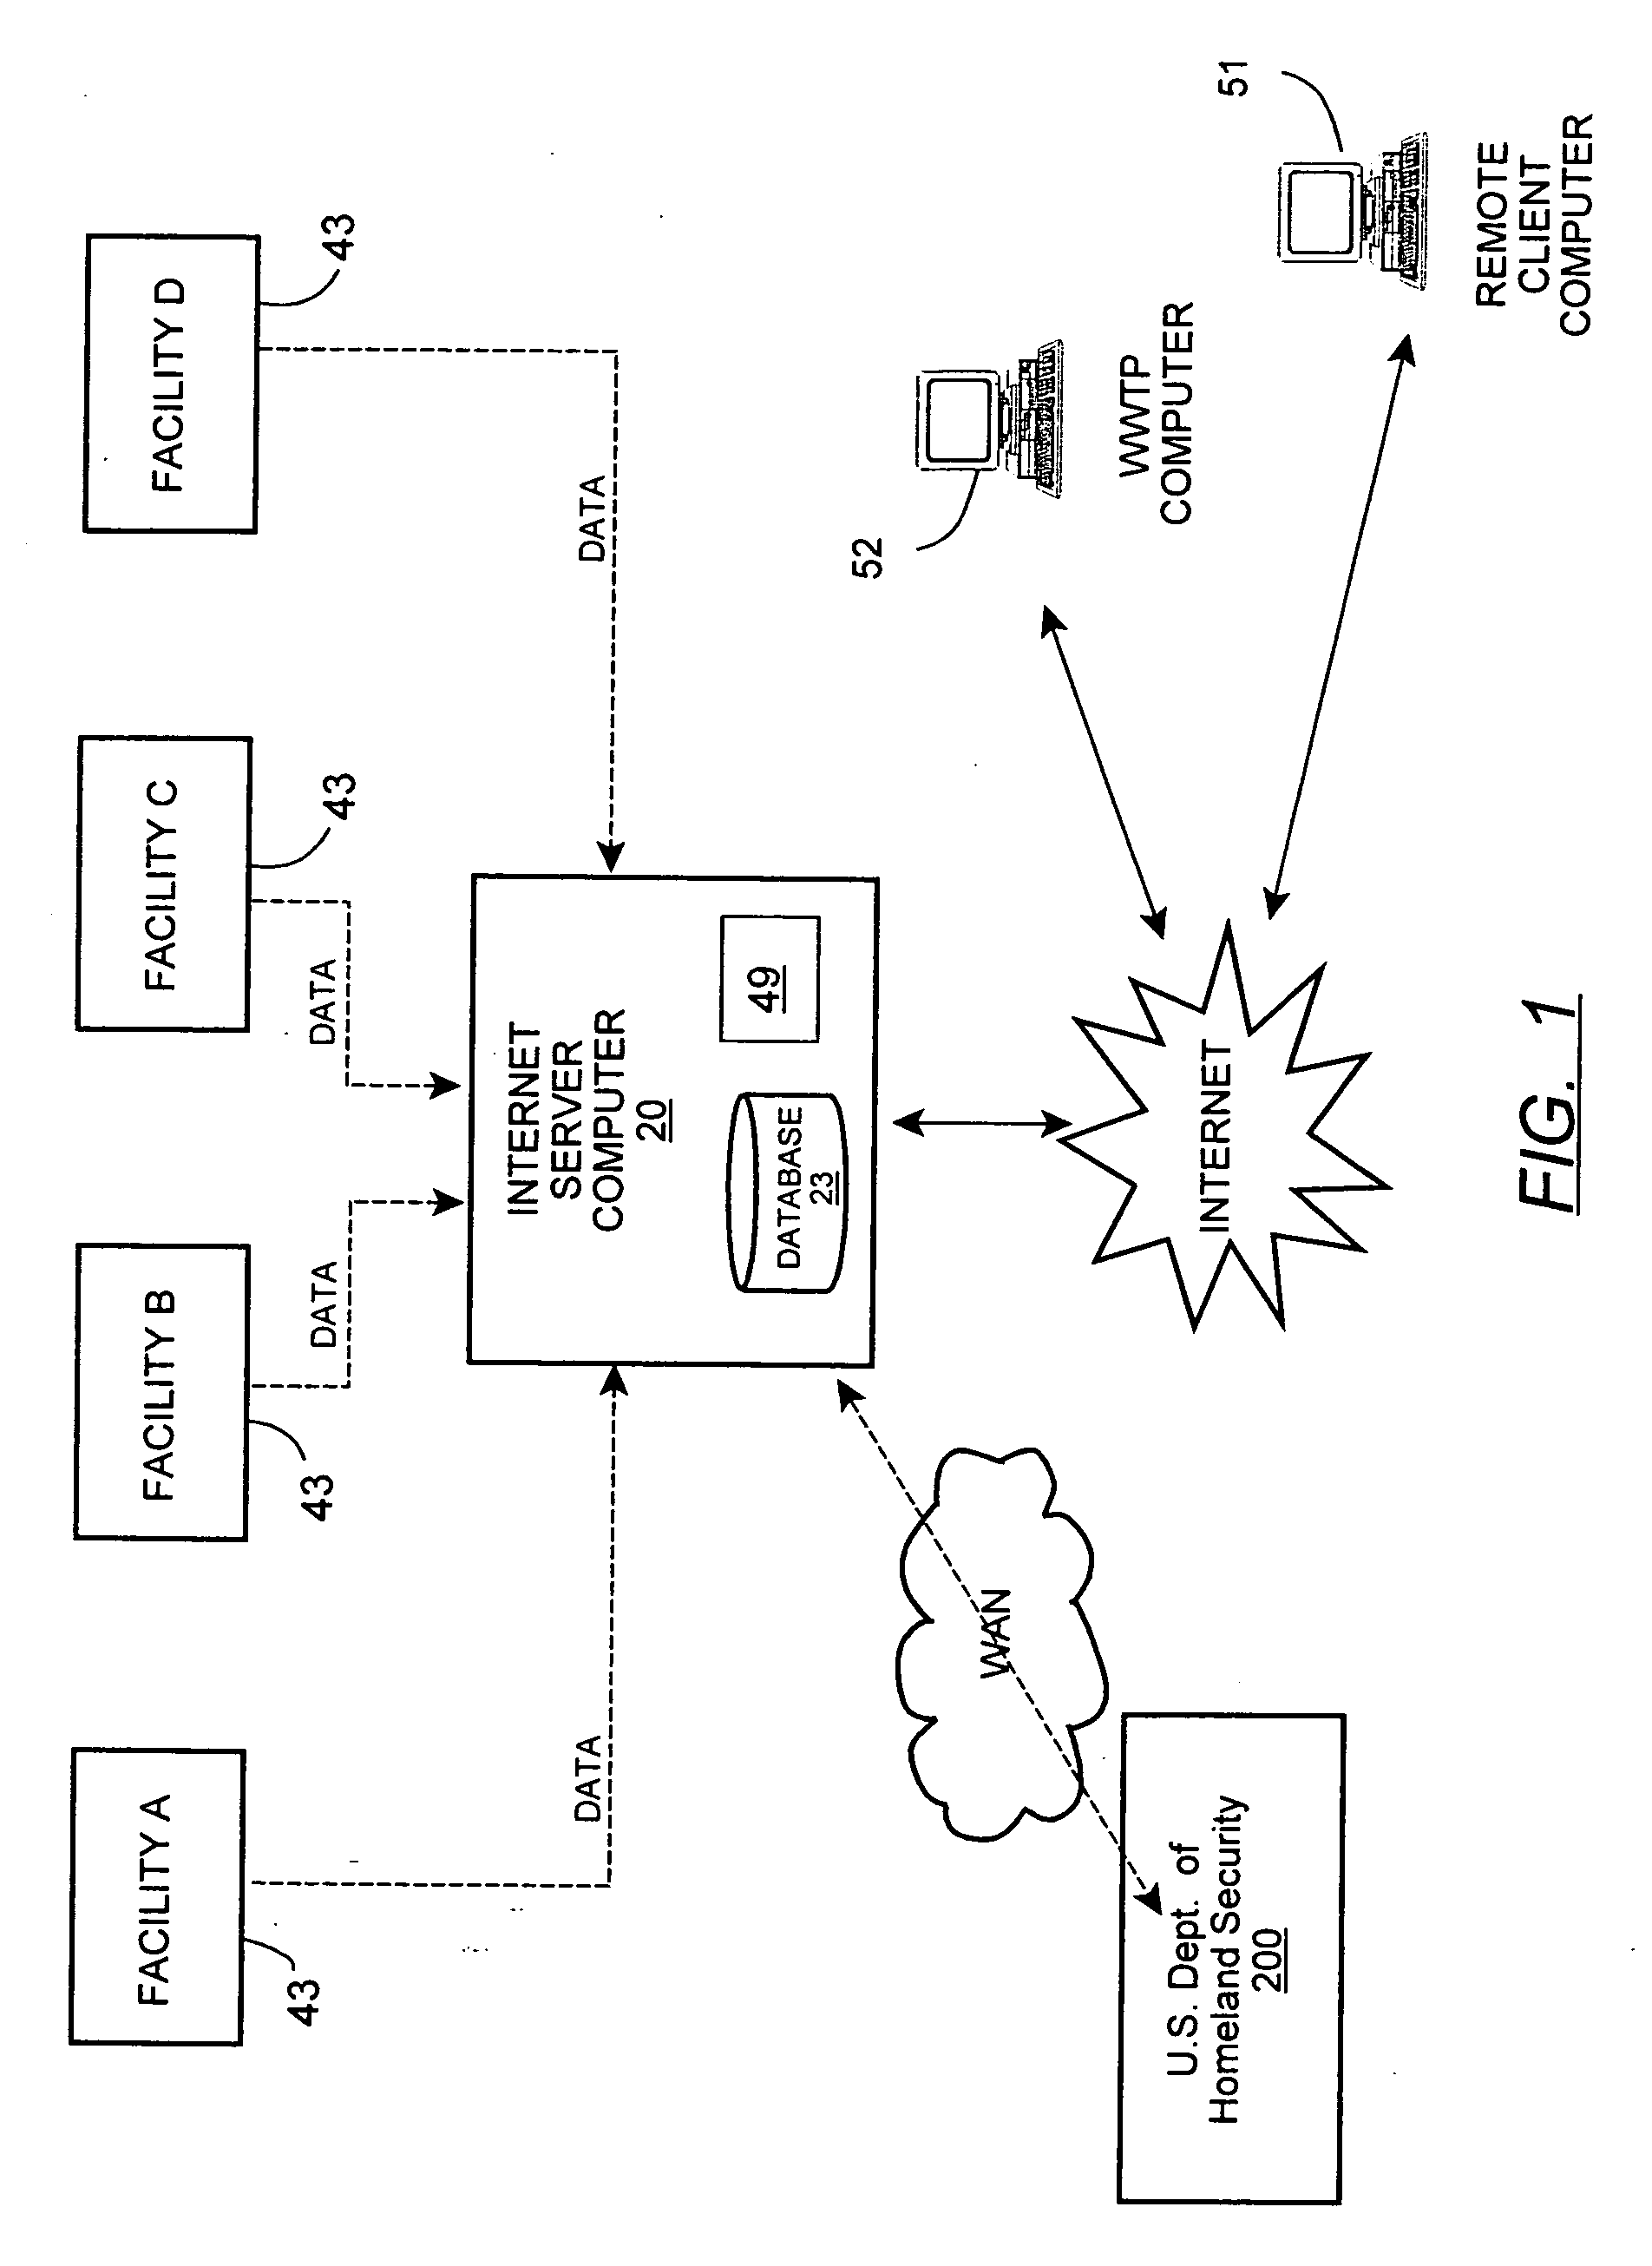 System for monitoring discharges into a waste water collection system